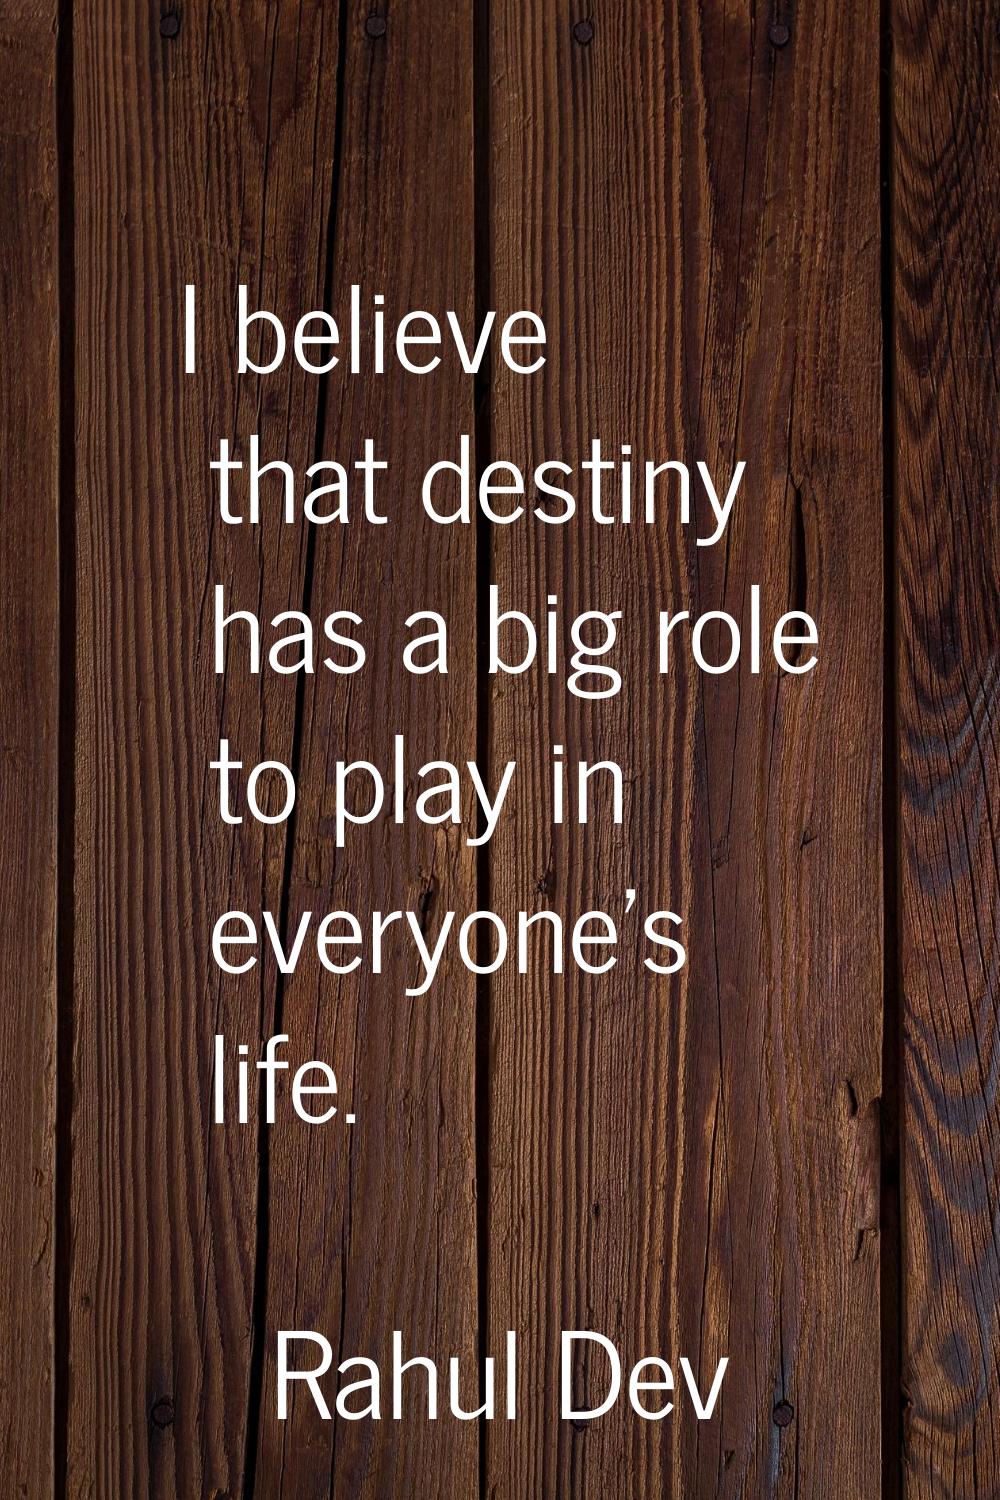 I believe that destiny has a big role to play in everyone's life.